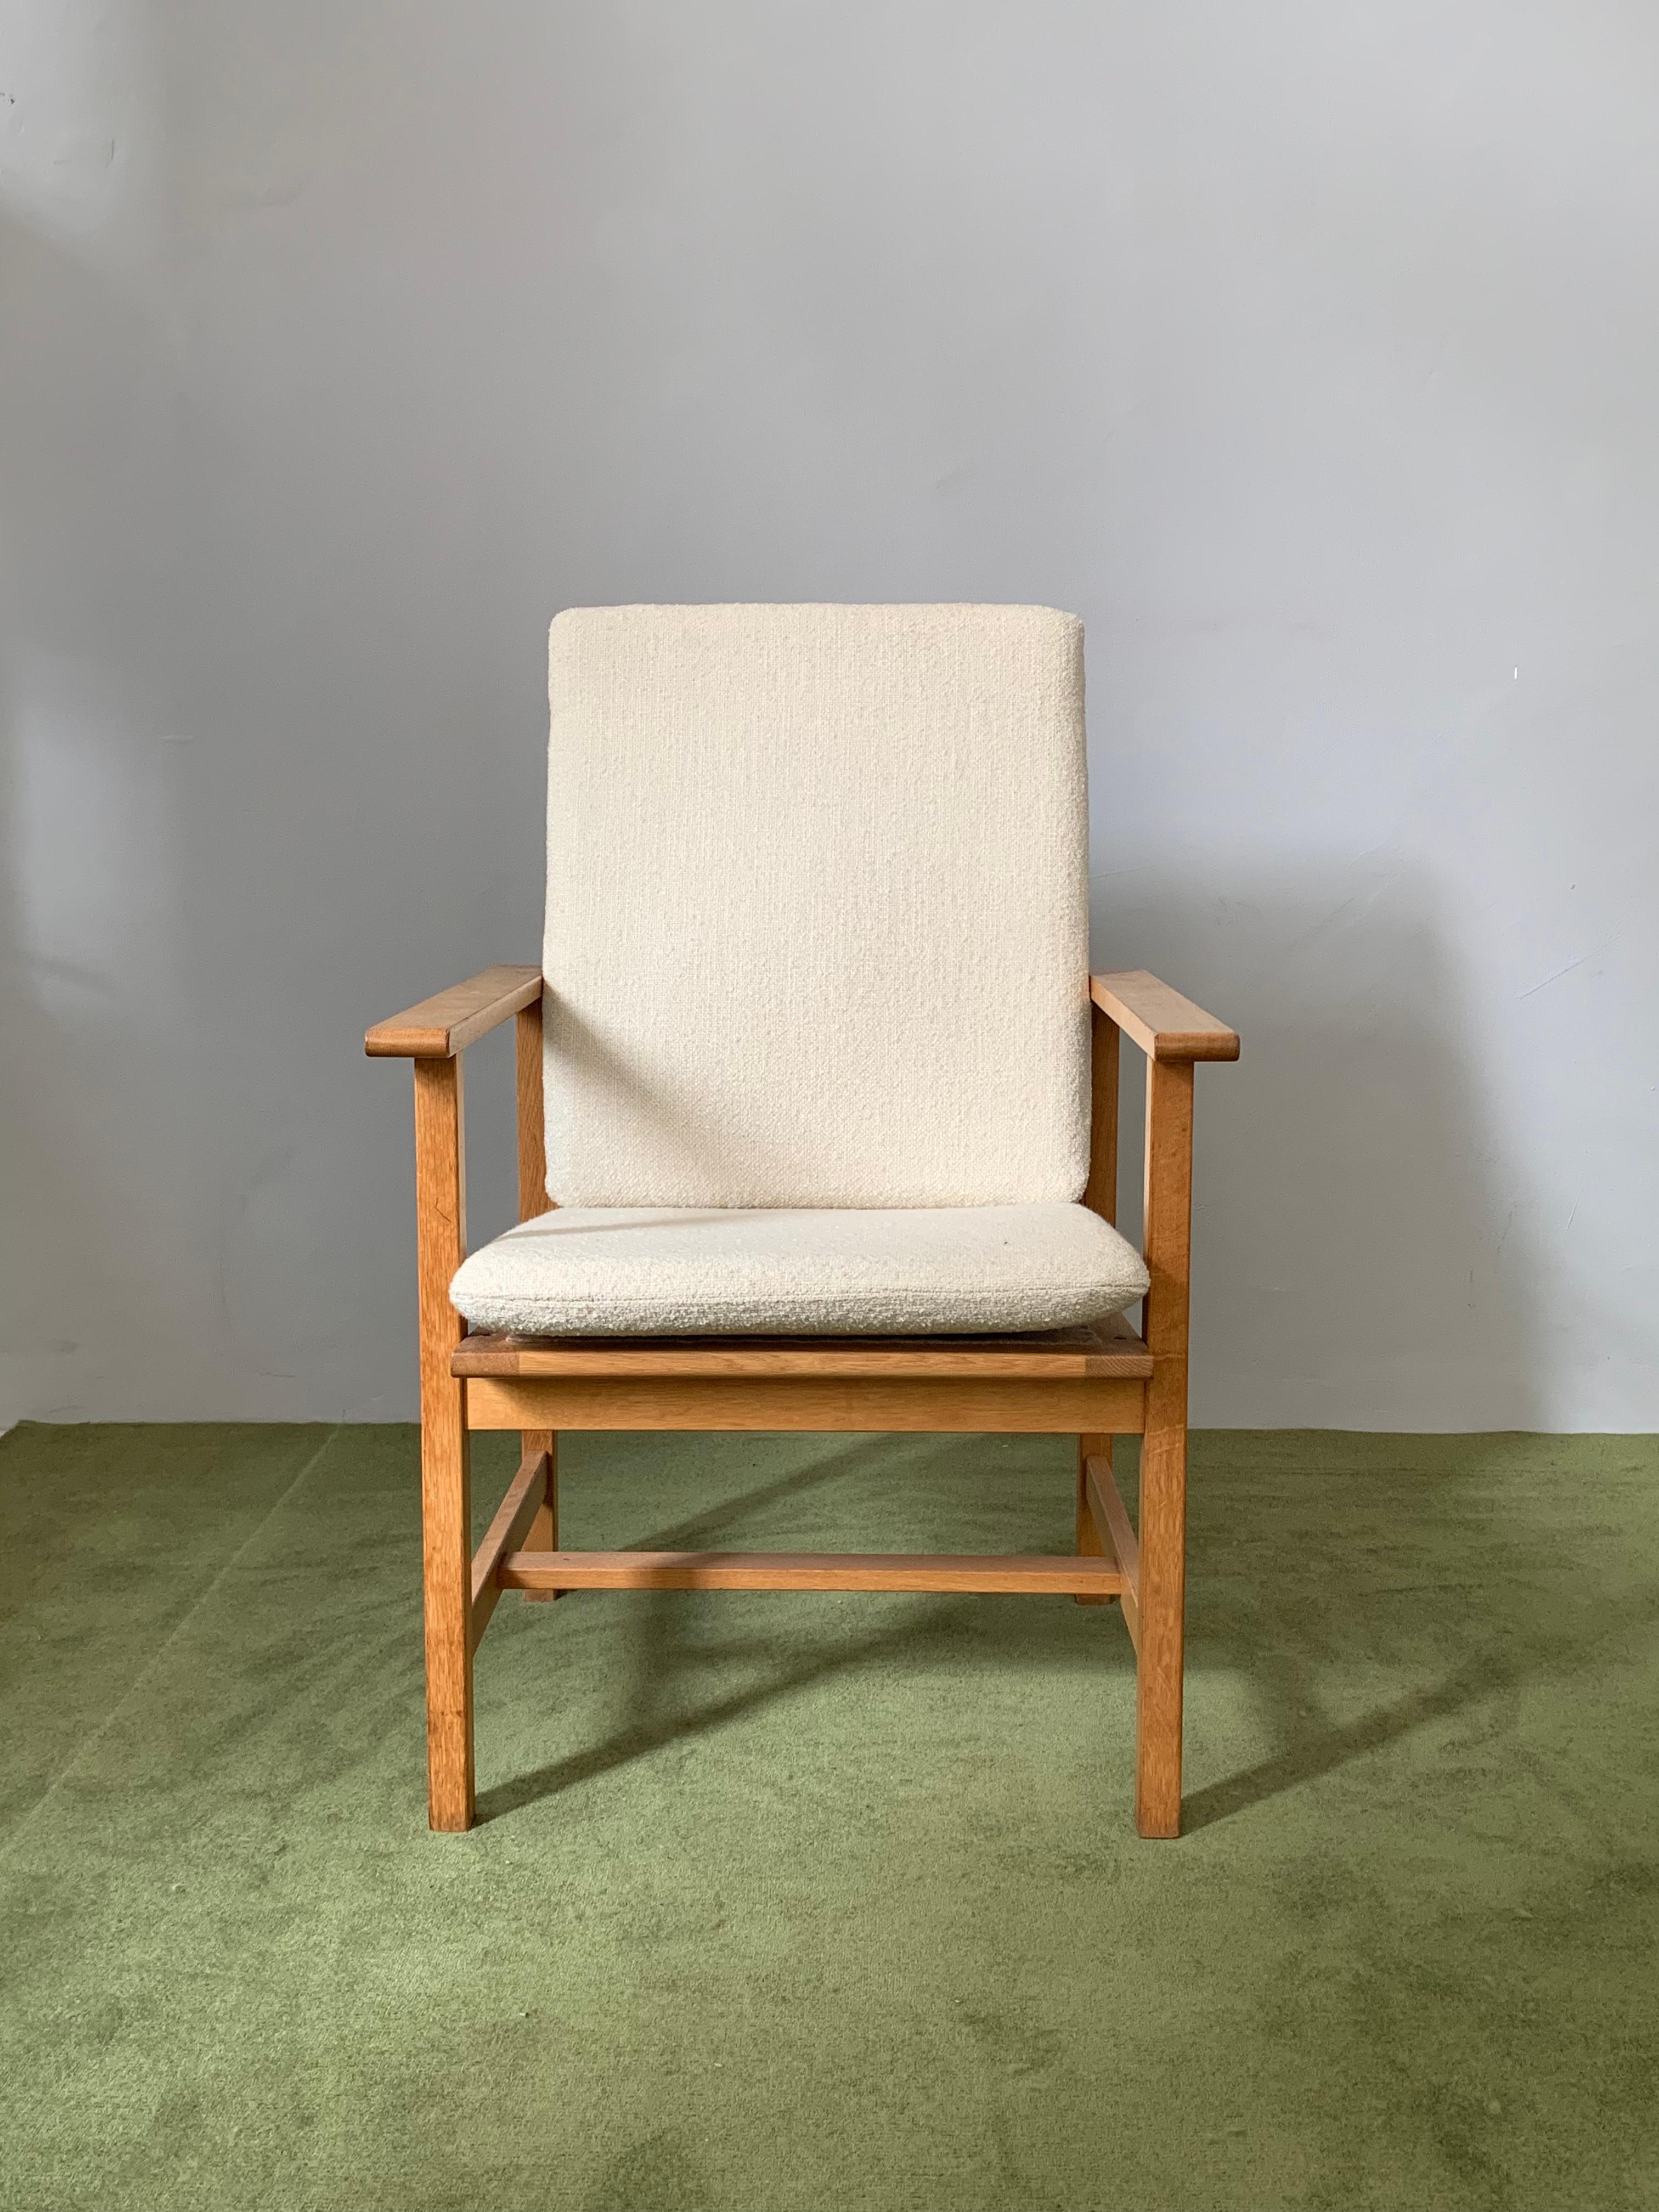 The iconic 2257 lounge chair by famous Danish designer Børge Mogensen is now avalibale in very good condition. This piece was made for made for Fredericia Furniture in Denmark, 1969. 
This modern item has a solid stained oak frame with loose seat